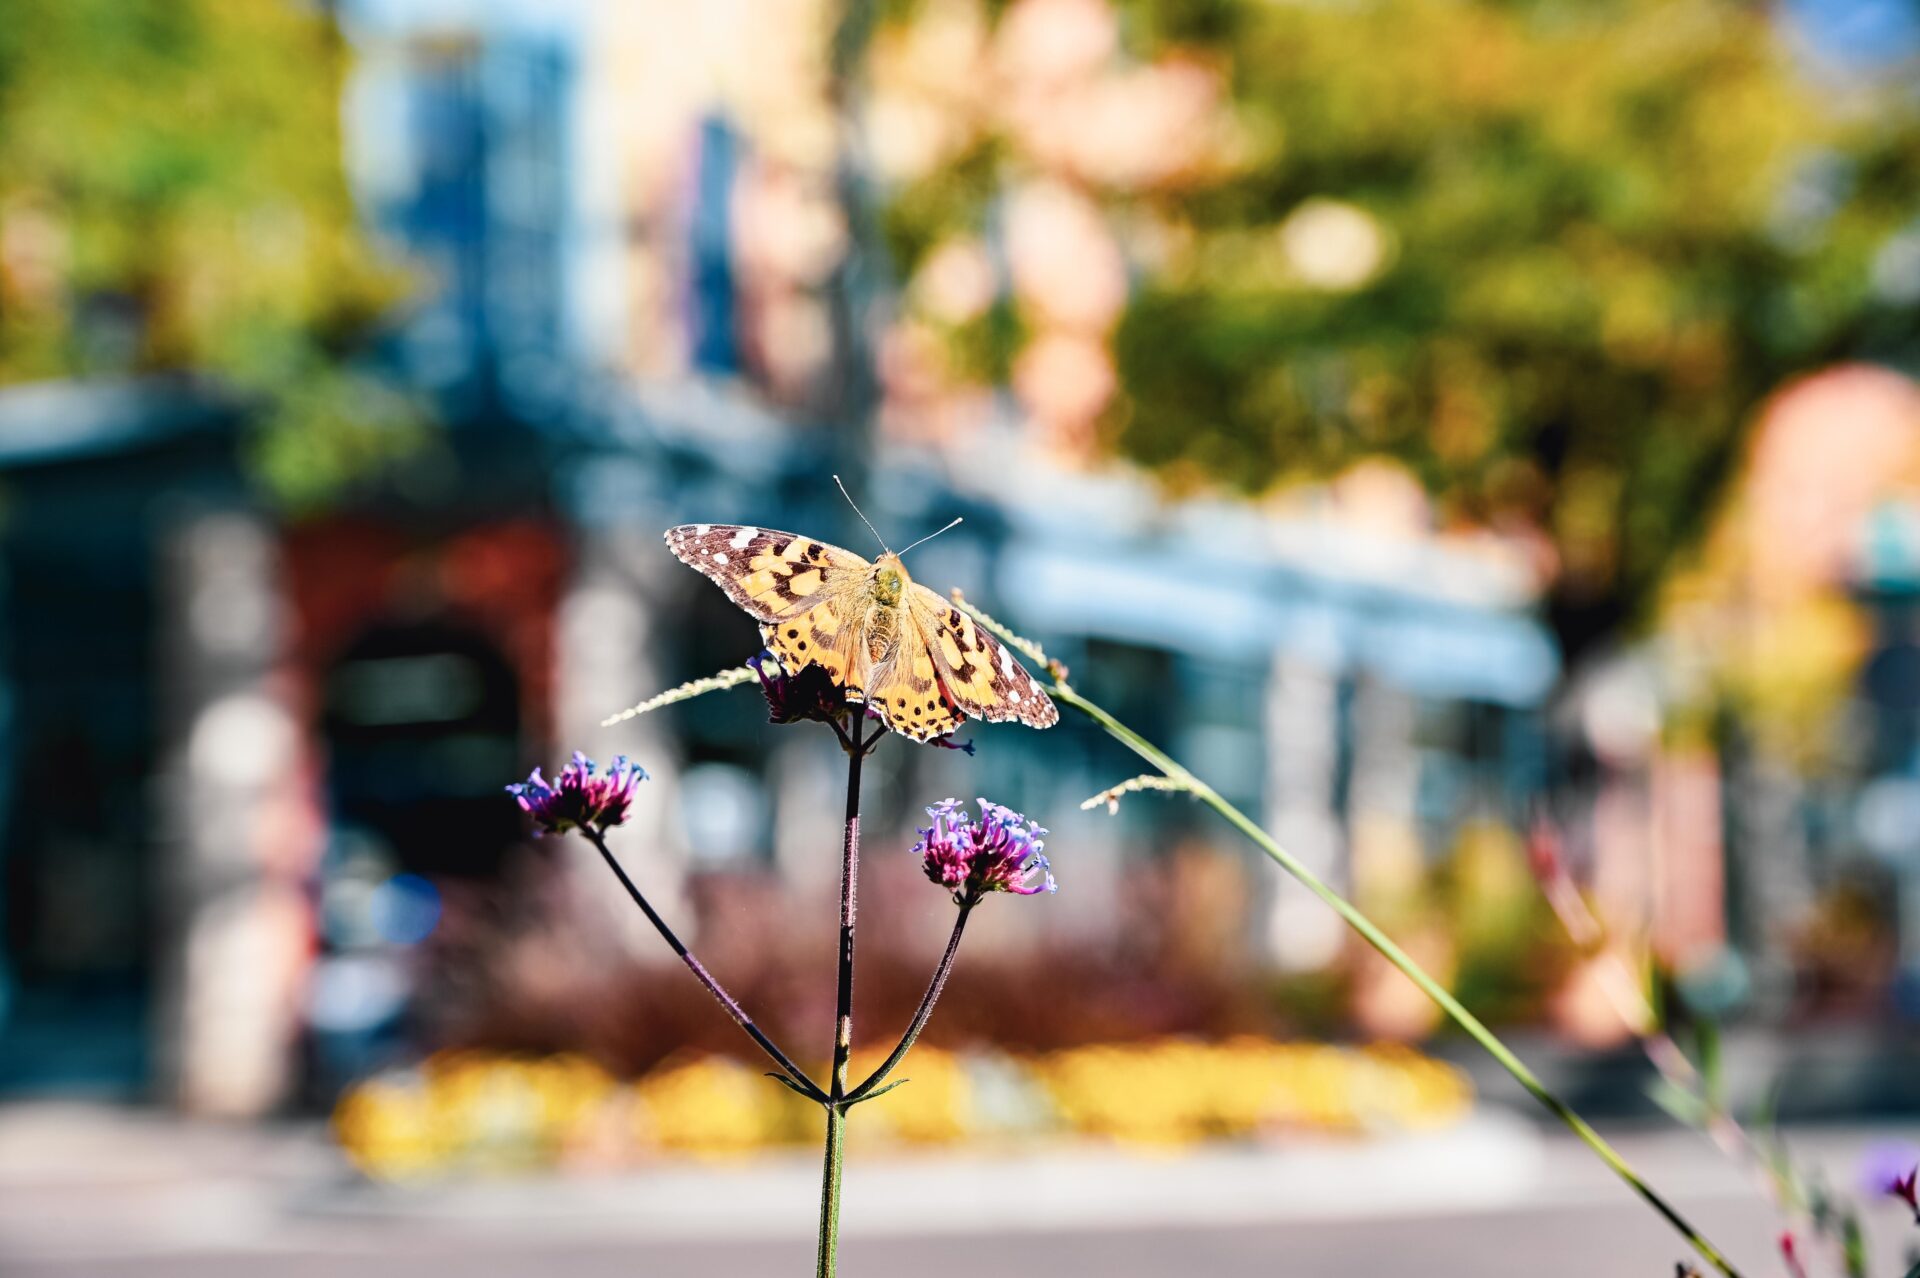 a butterfly sits on a purple flower, old town fort collins can be seen blurred in the background